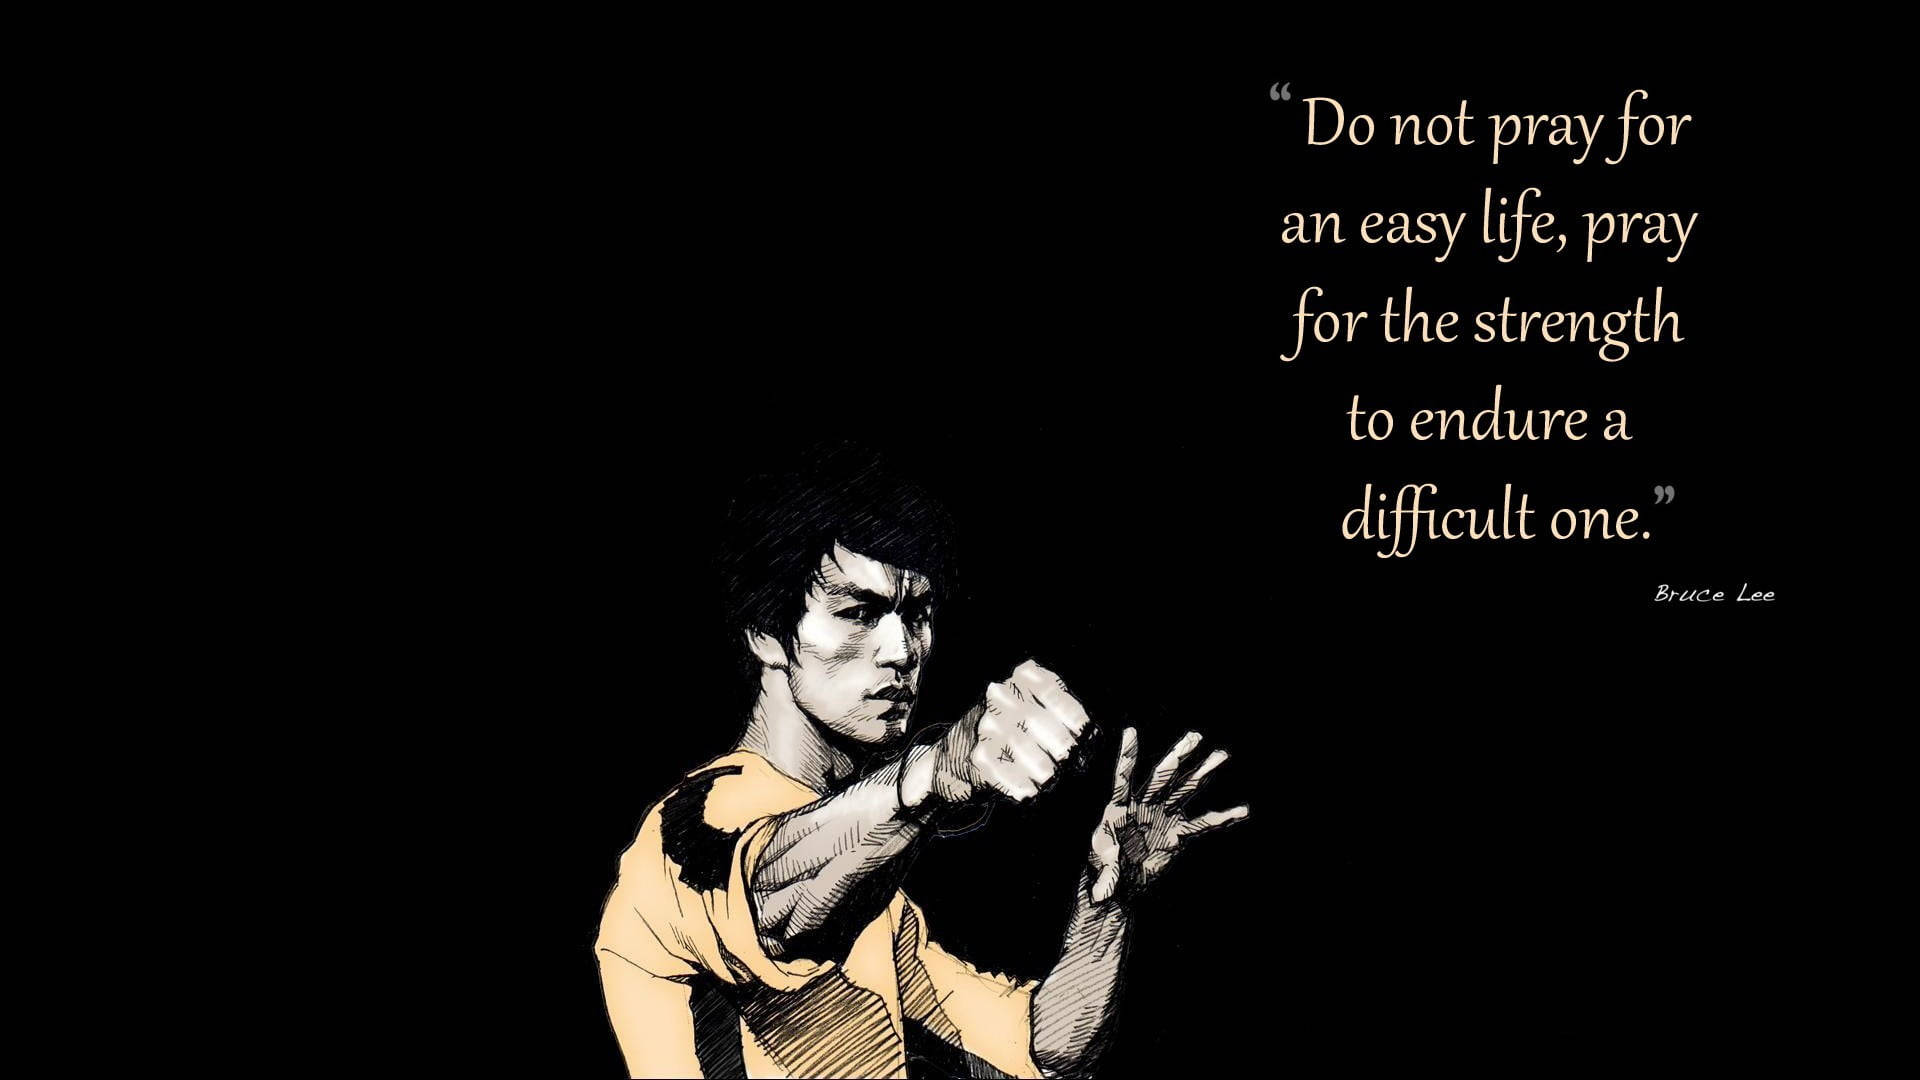 Bruce Lee Life Quotes Wallpaper